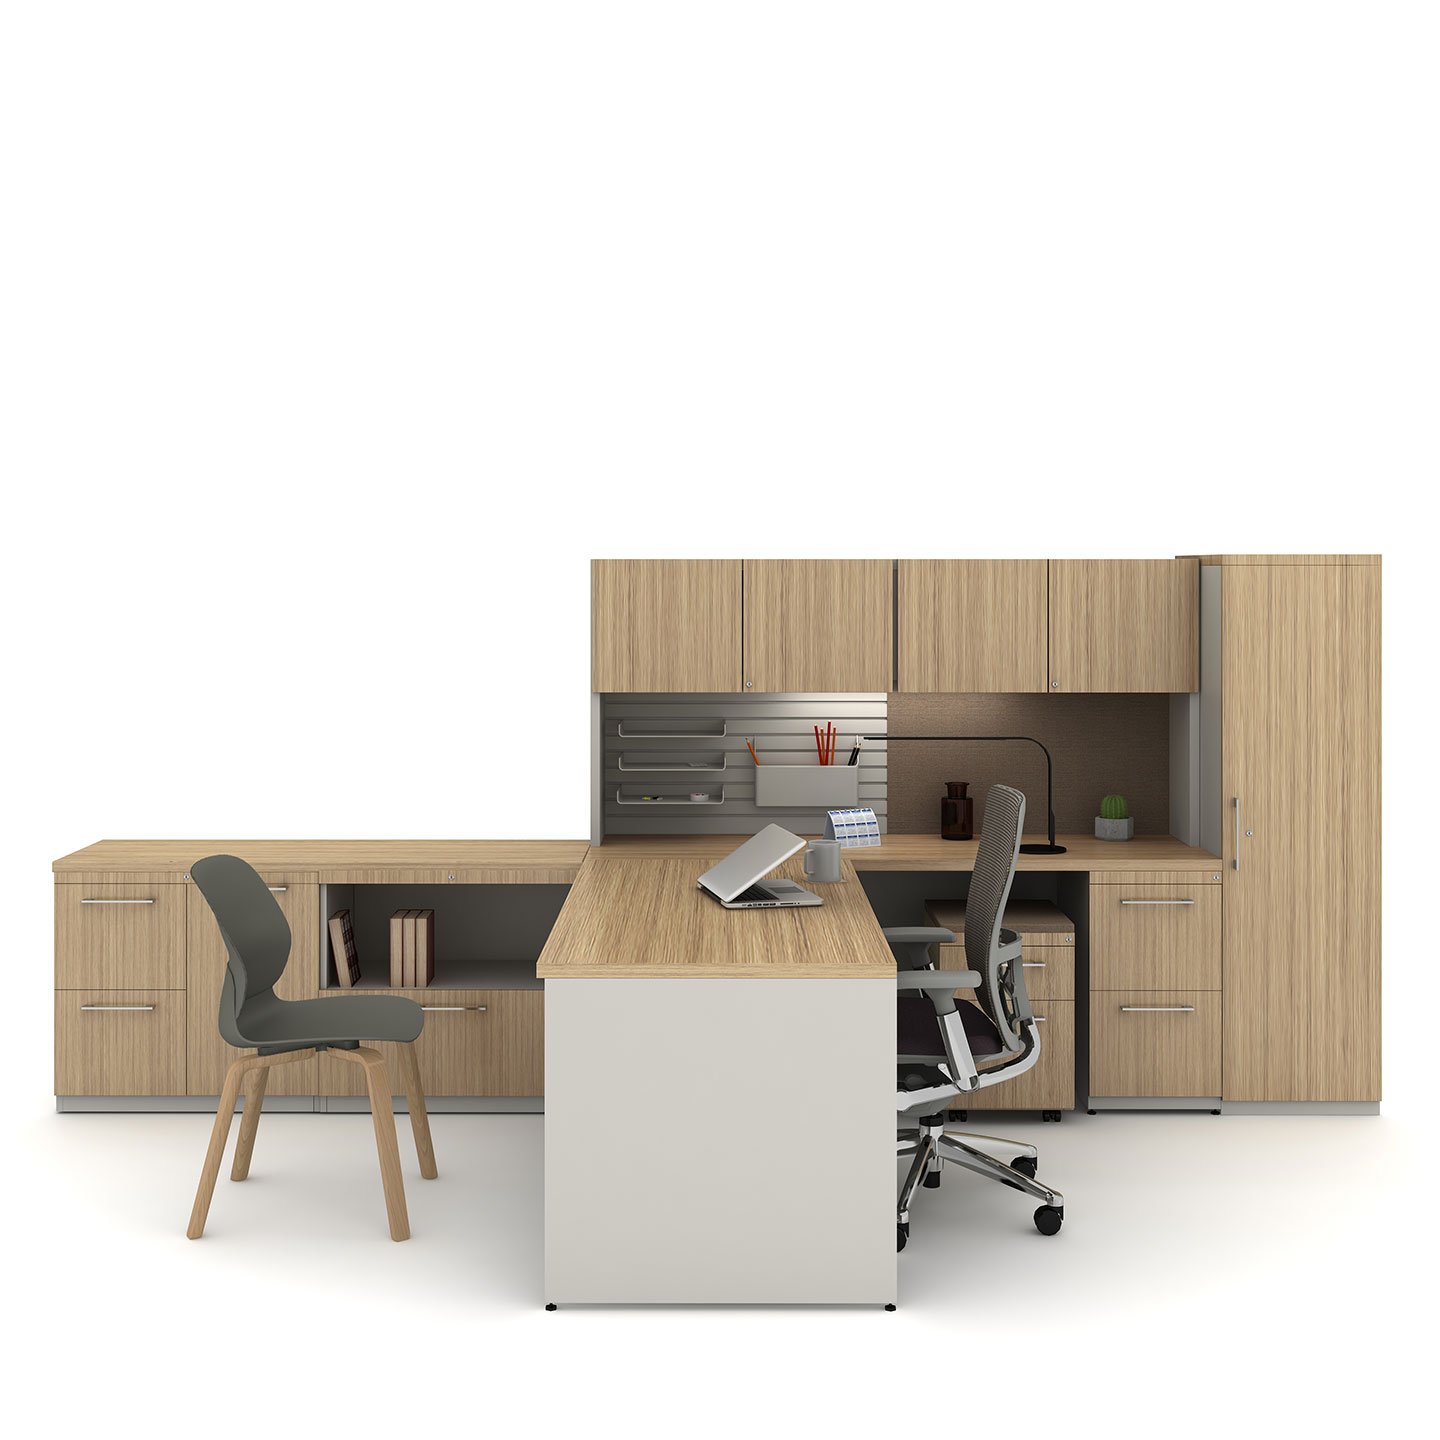 Haworth X Series Desk in maple color with private executive desk mock up 